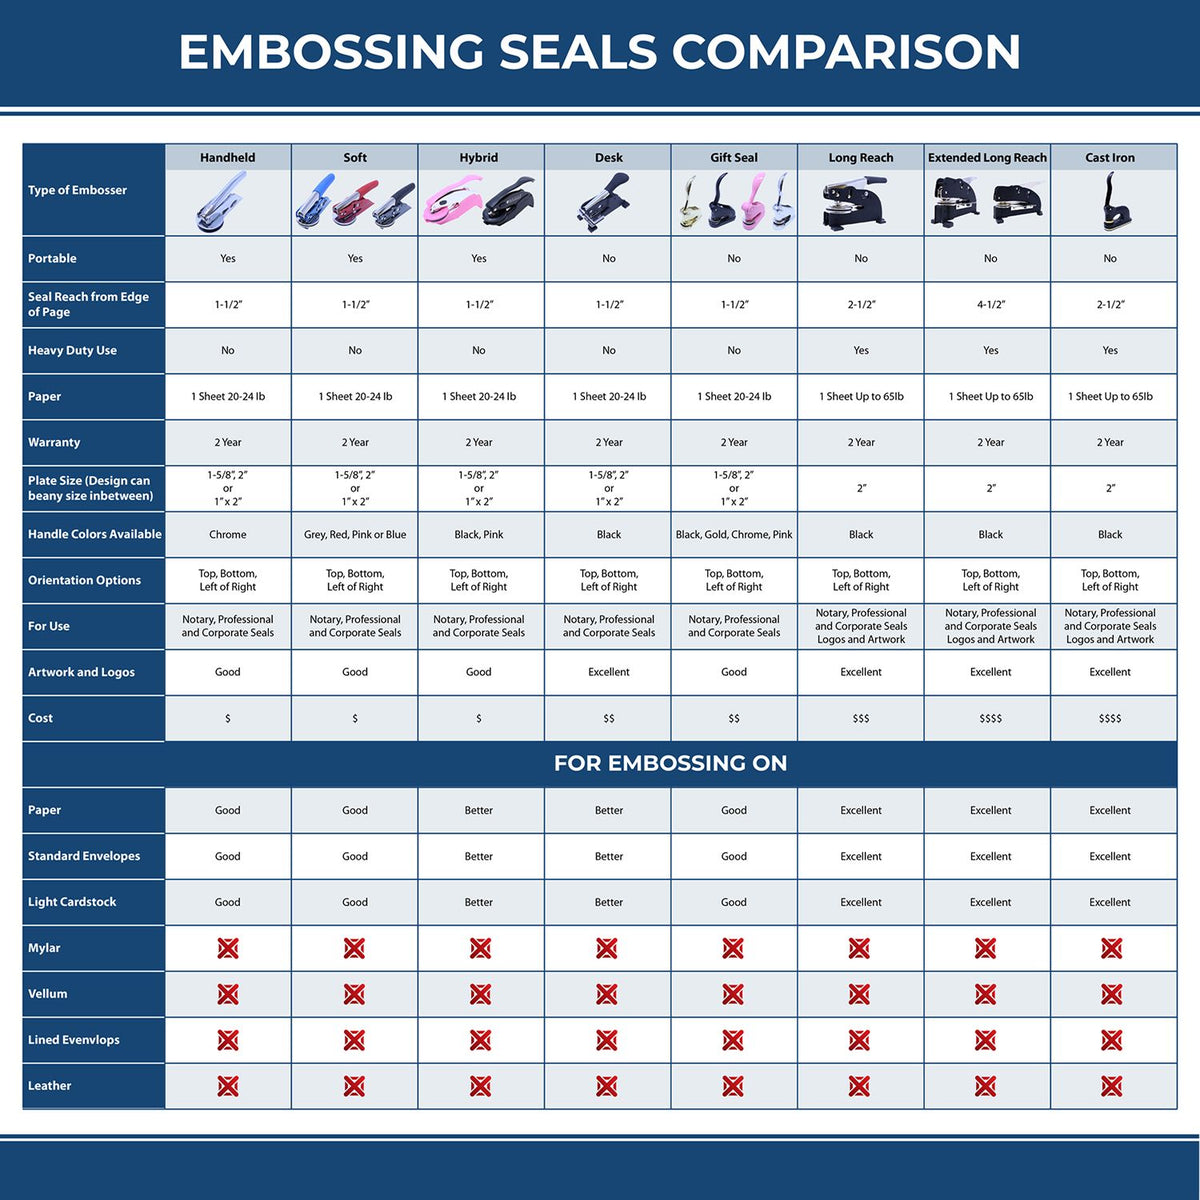 A comparison chart for the different types of mount models available for the Gift Connecticut Geologist Seal